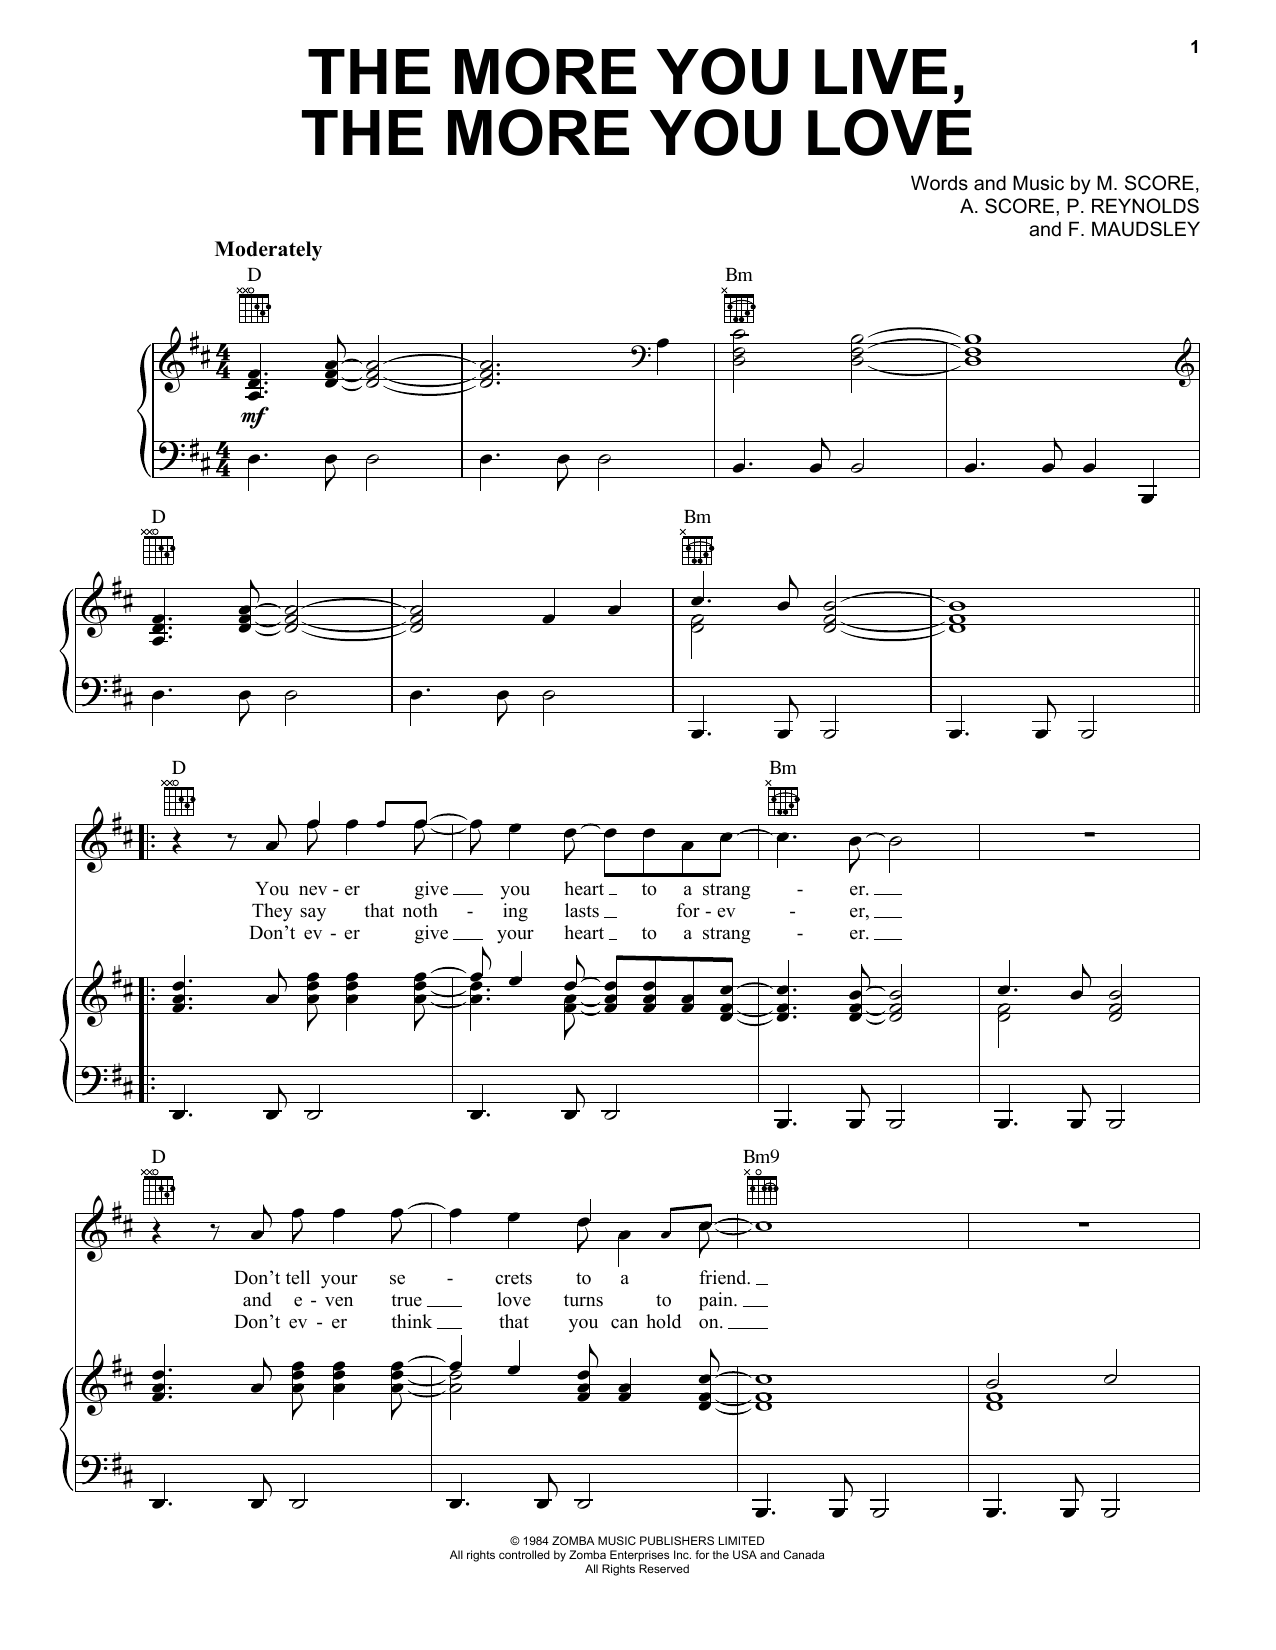 Download A Flock Of Seagulls The More You Live, The More You Love Sheet Music